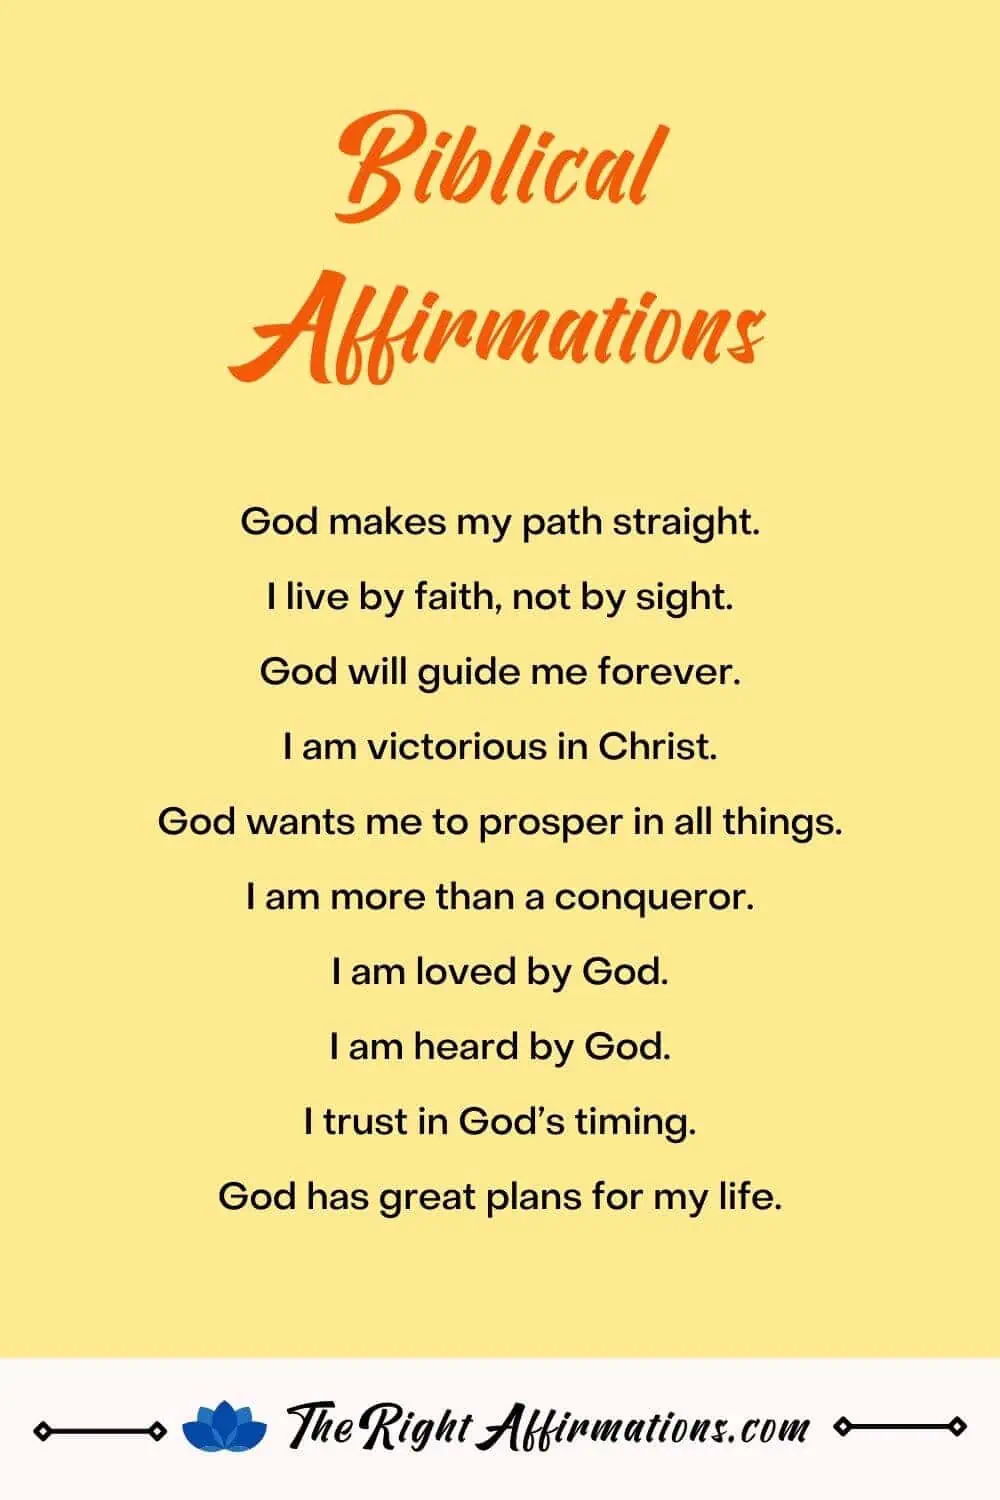 affirmations-for-christians-from-the-bible